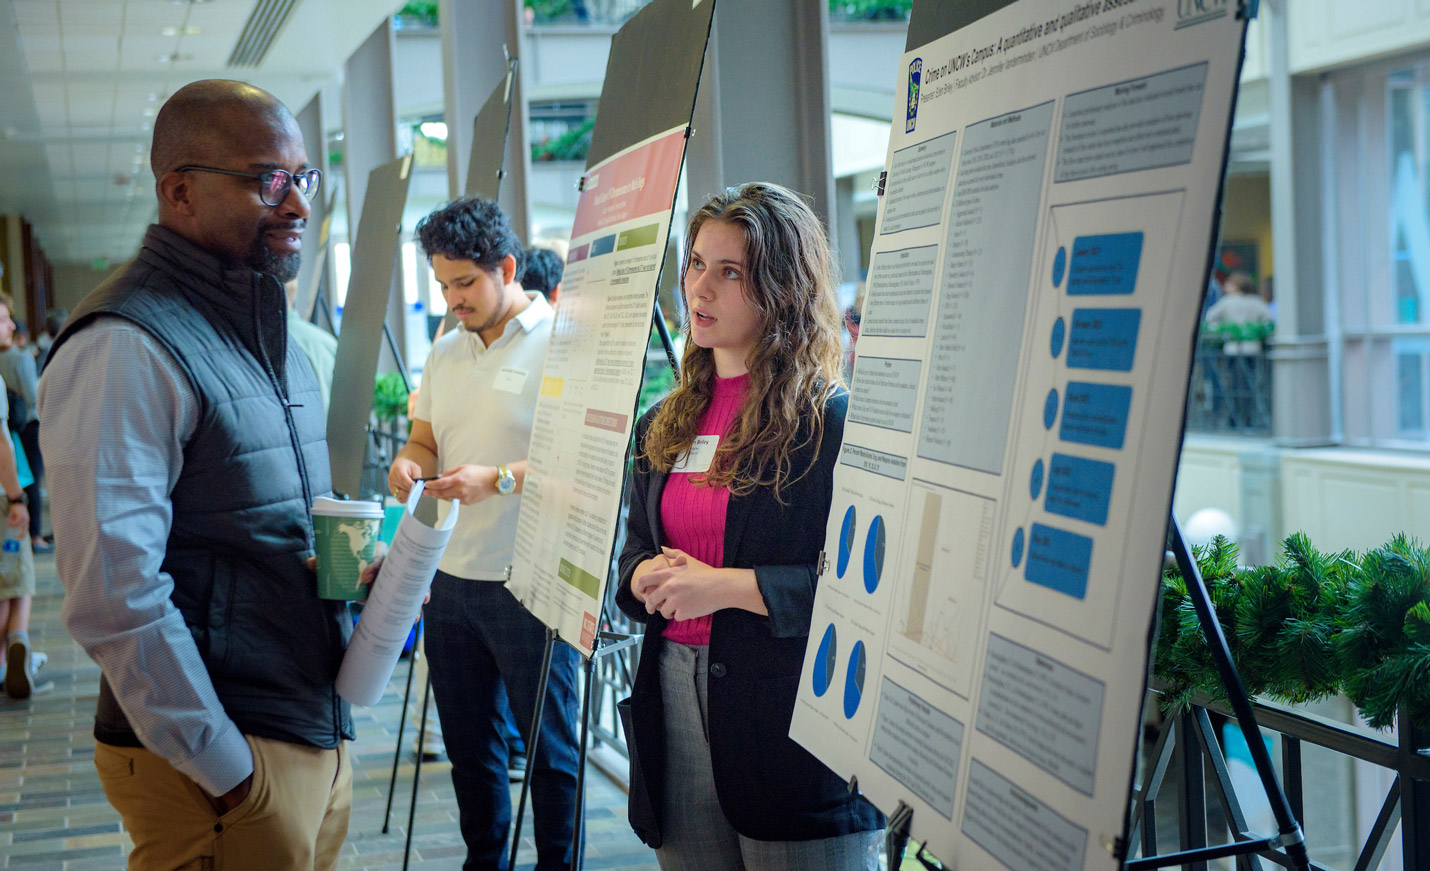 A student explains her research poster to a man during a student research showcase